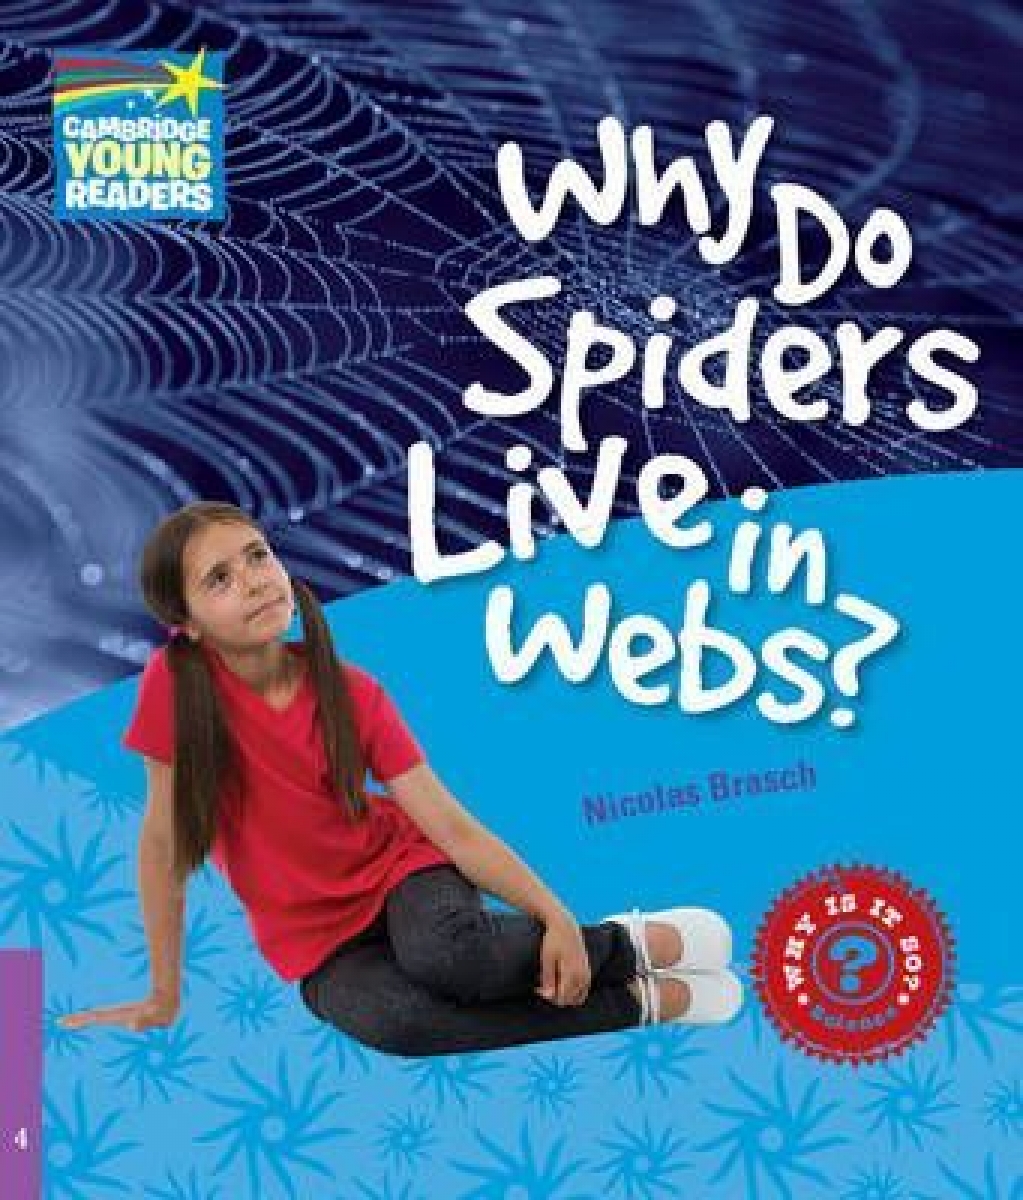 Brasch, Nicolas Factbooks: Why do spiders live in webs? level 4 